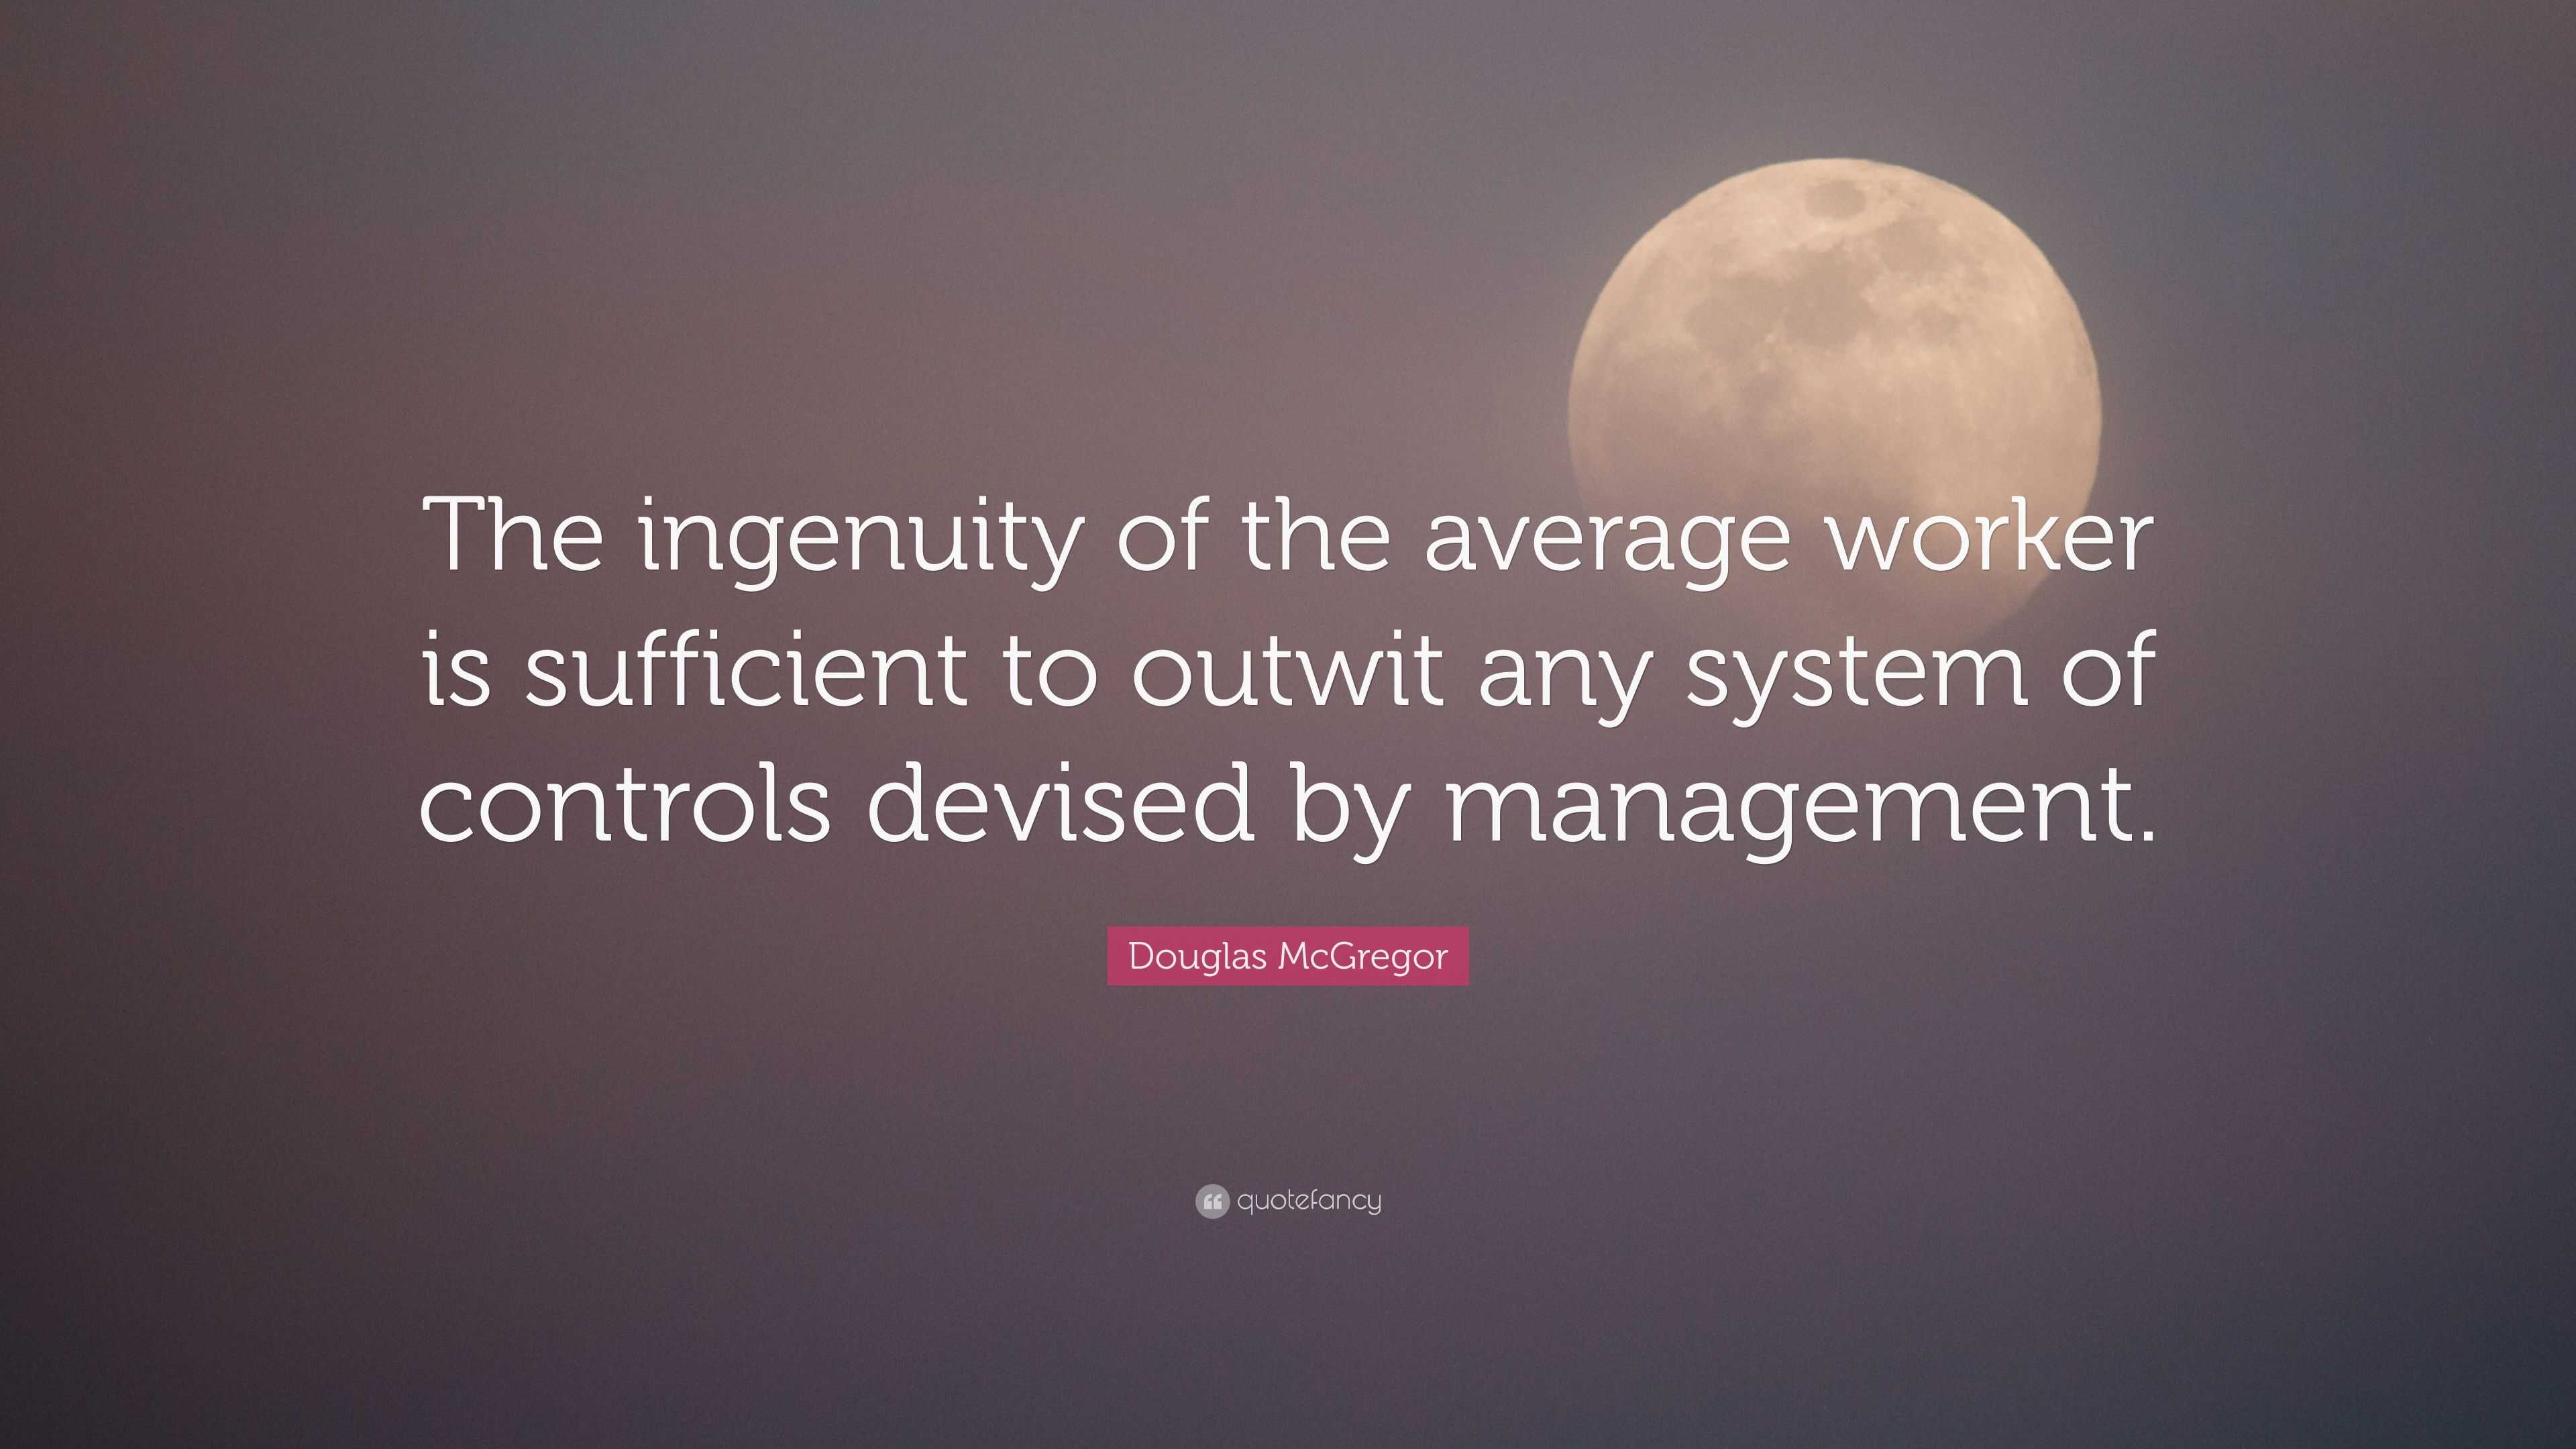 Douglas McGregor Quote: “The ingenuity of the average worker is